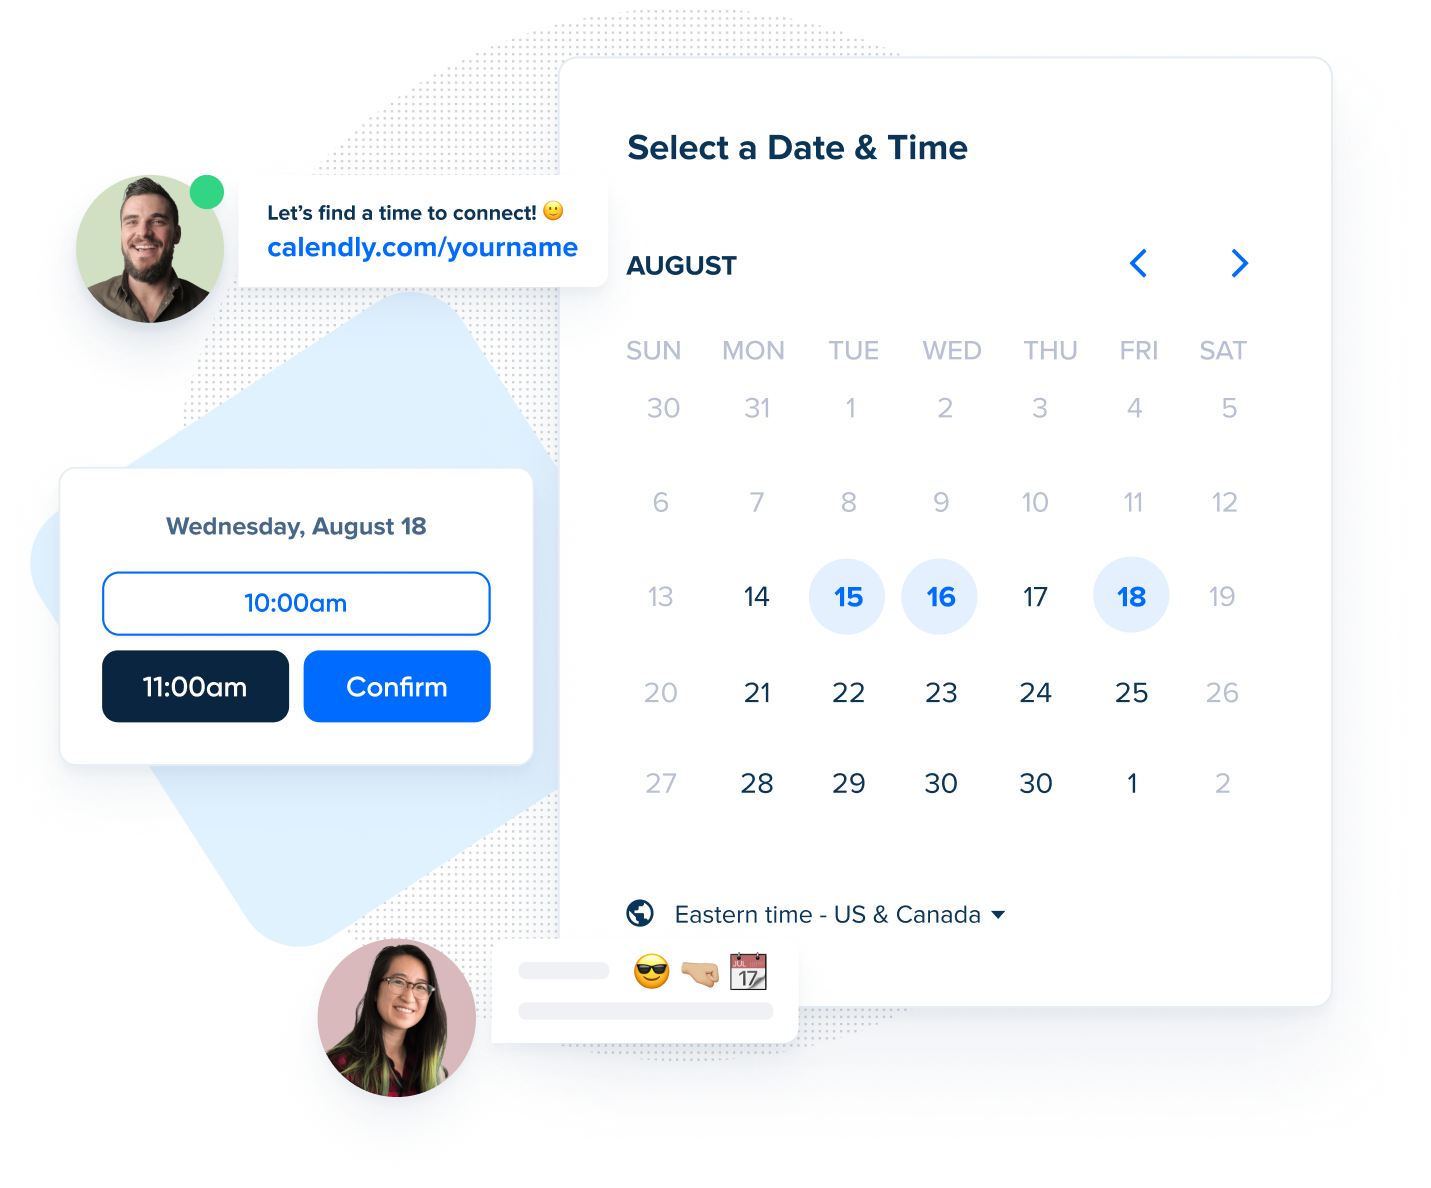 Calendly helps you book better meetings, faster, by syncing and integrating everything in one intuitive platform.